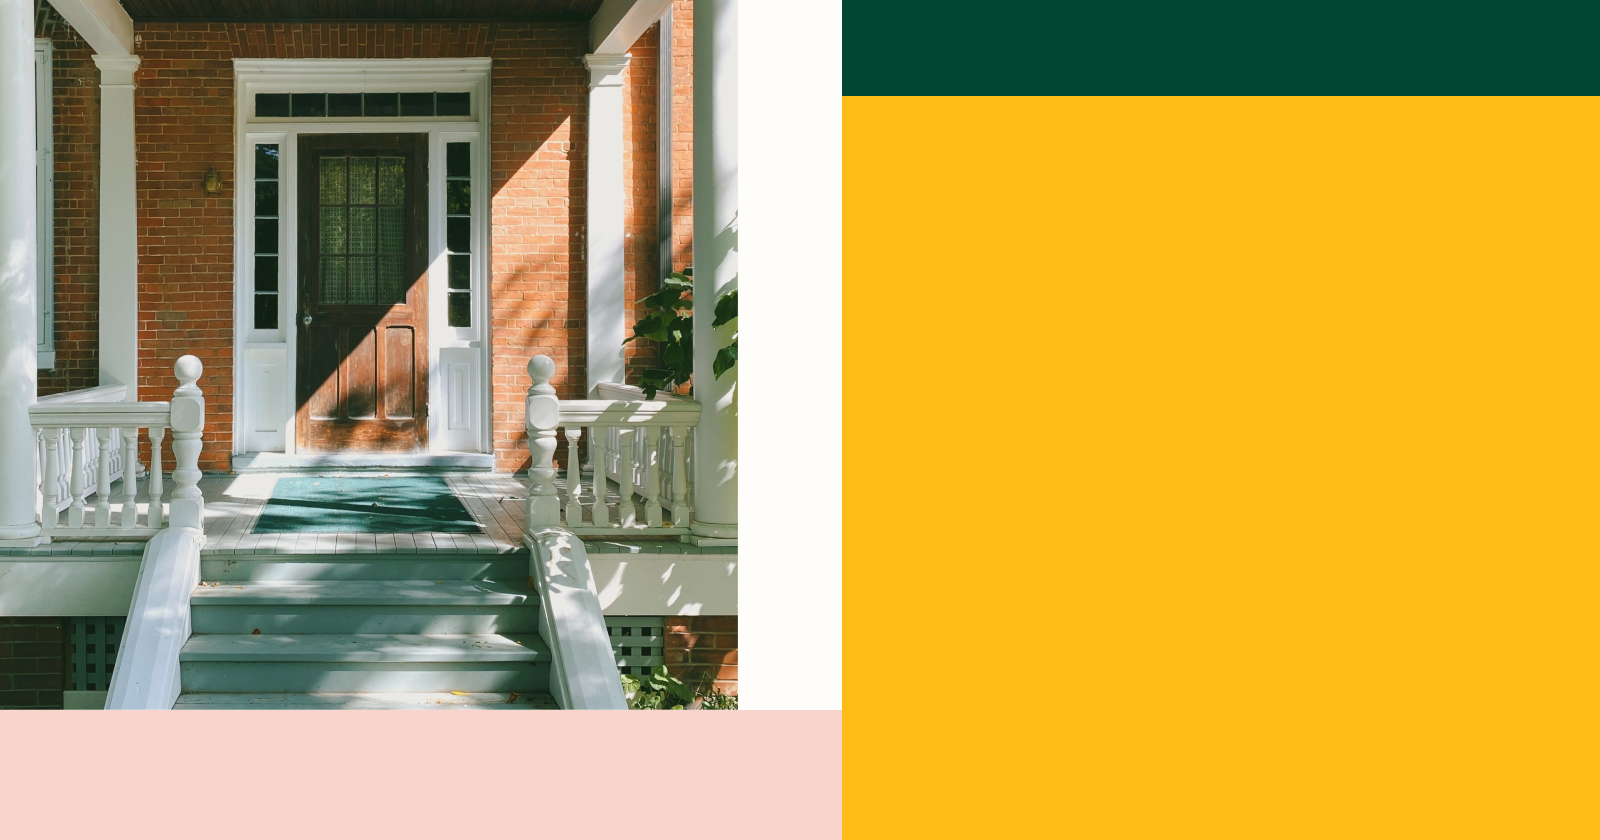 Image of Front Door and Porch Within White and Pink Background Next to Dark Yellow and Dark Green Rectangles